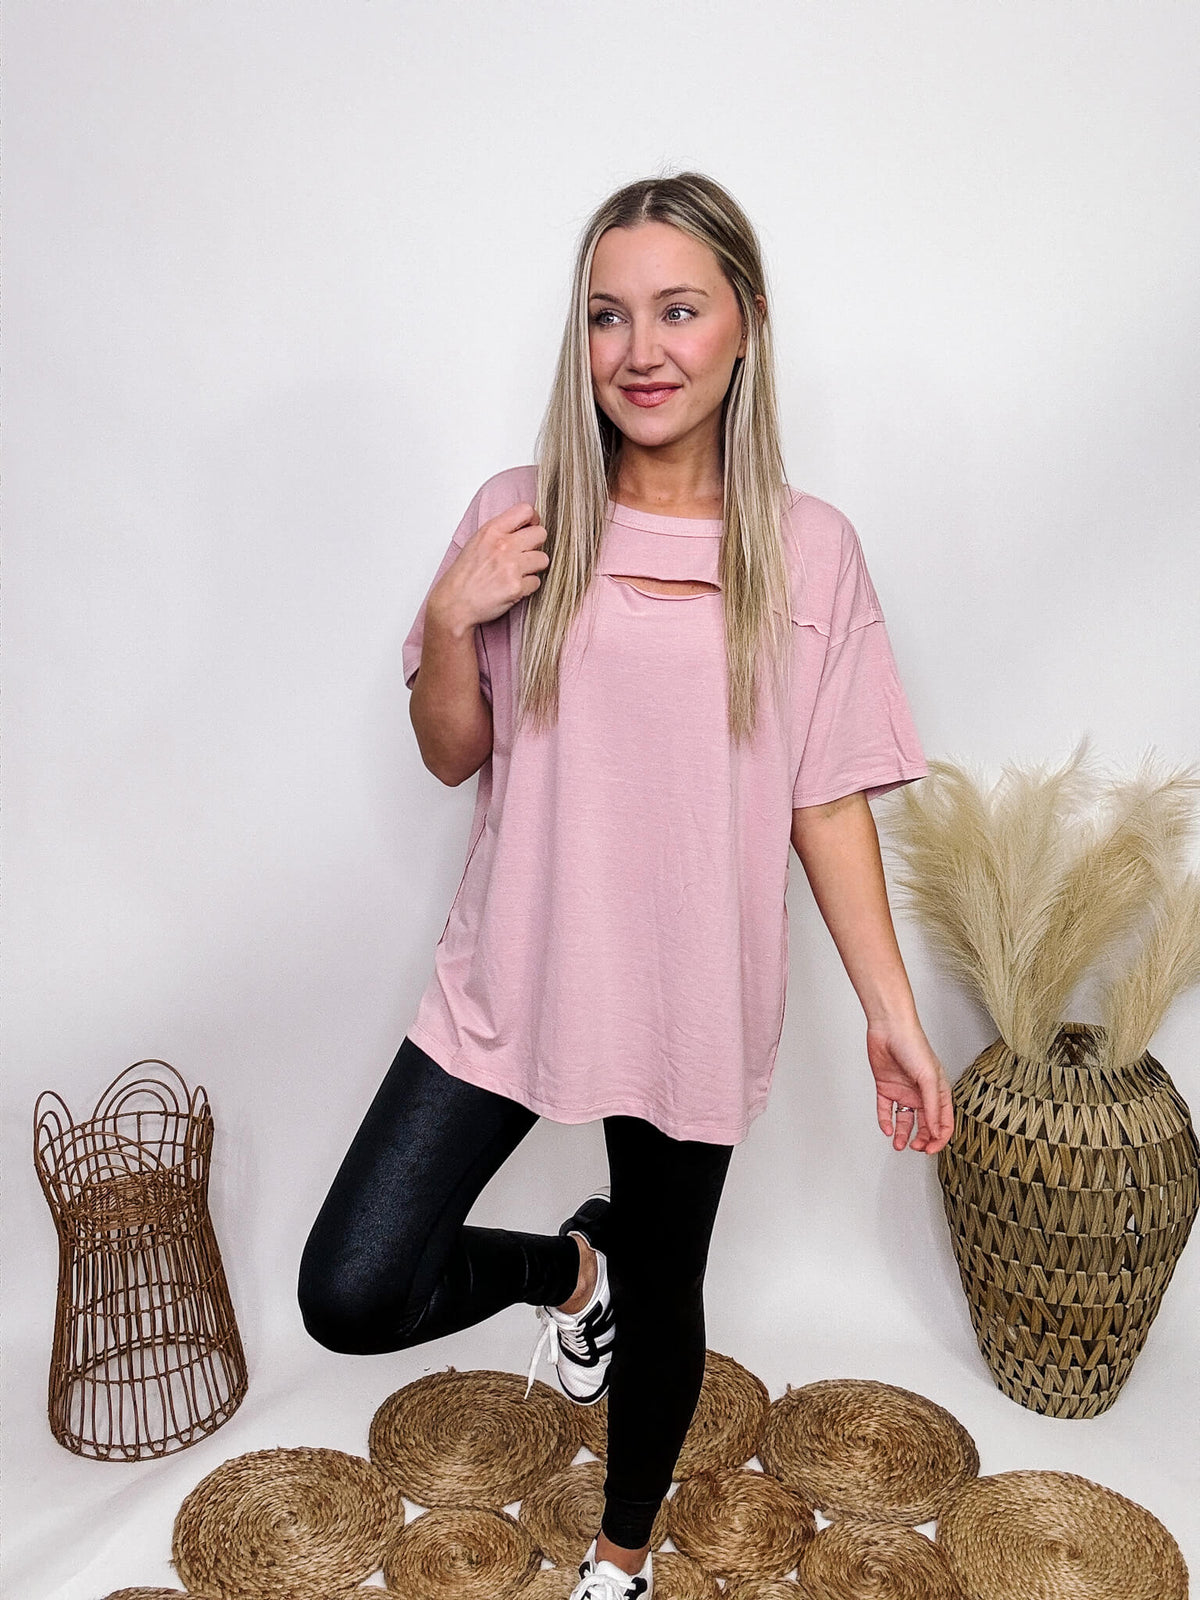 Rae Mode Pink Blush Oversized T-Shirt Cutout Detail at Chest Oversized Fit Mineral Washed 48% Polyester, 37% Cotton, 12% Rayon, 3% Spandex